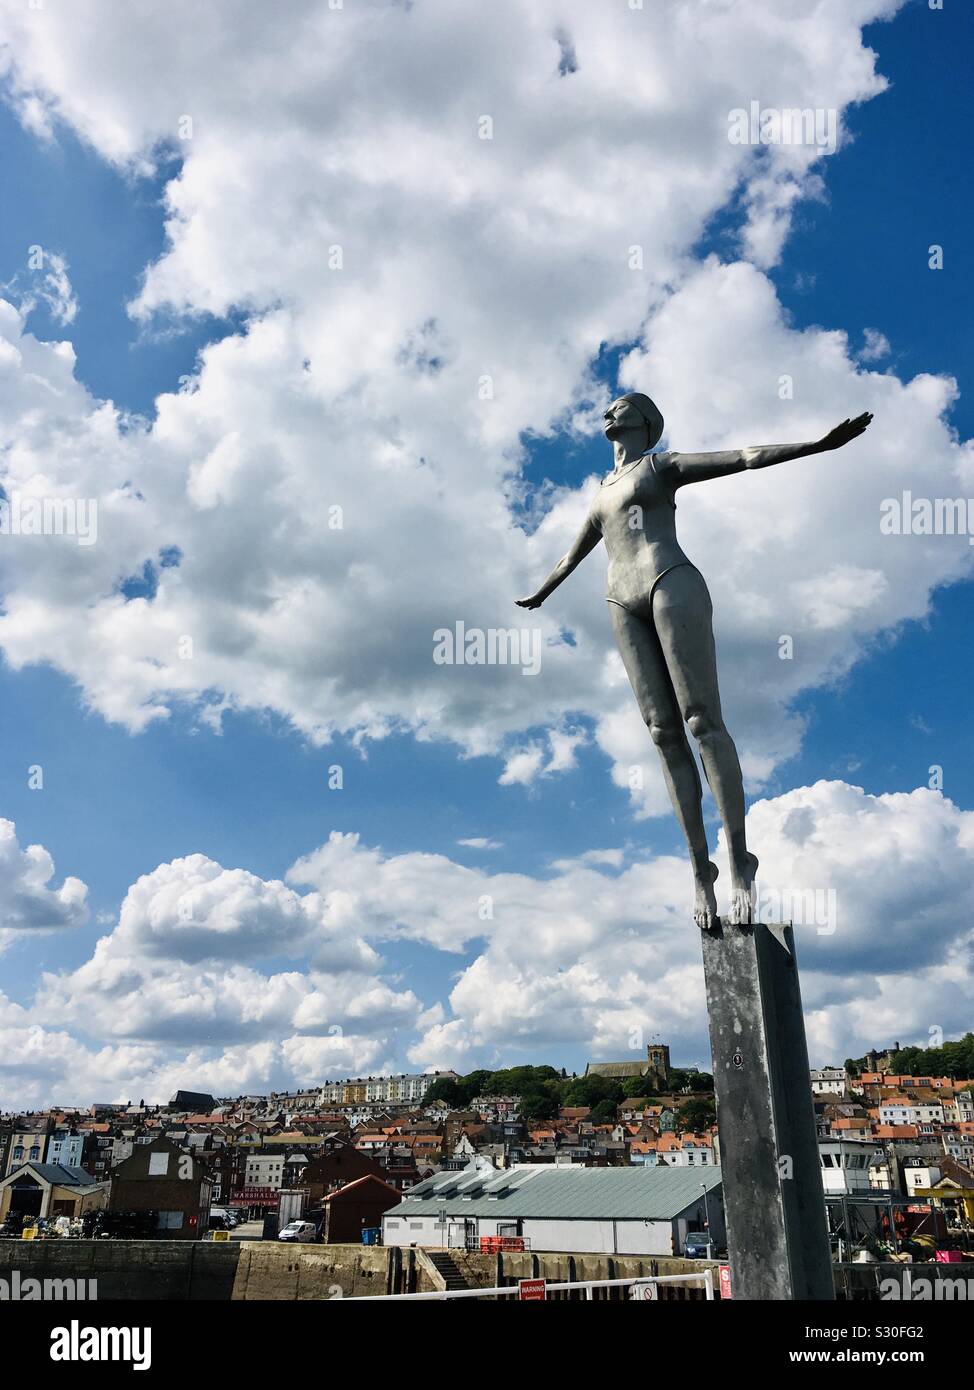 The diving belle statue on Vincent’s pier to celebrate Scarborough as being the first UK sea bathing resort with Scarborough in background, Yorkshire Stock Photo